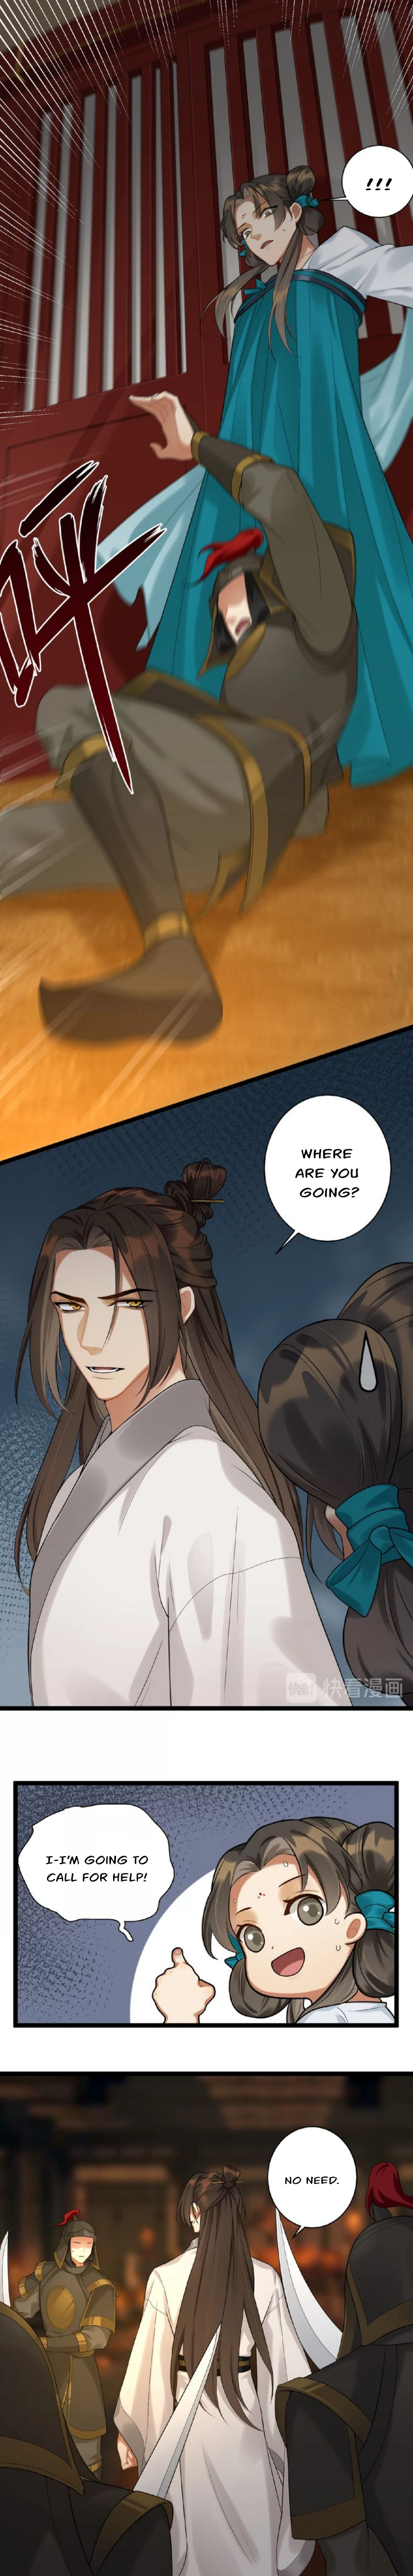 Please Fall Asleep, Emperor Ch. 3 The Emperor and the Assassin